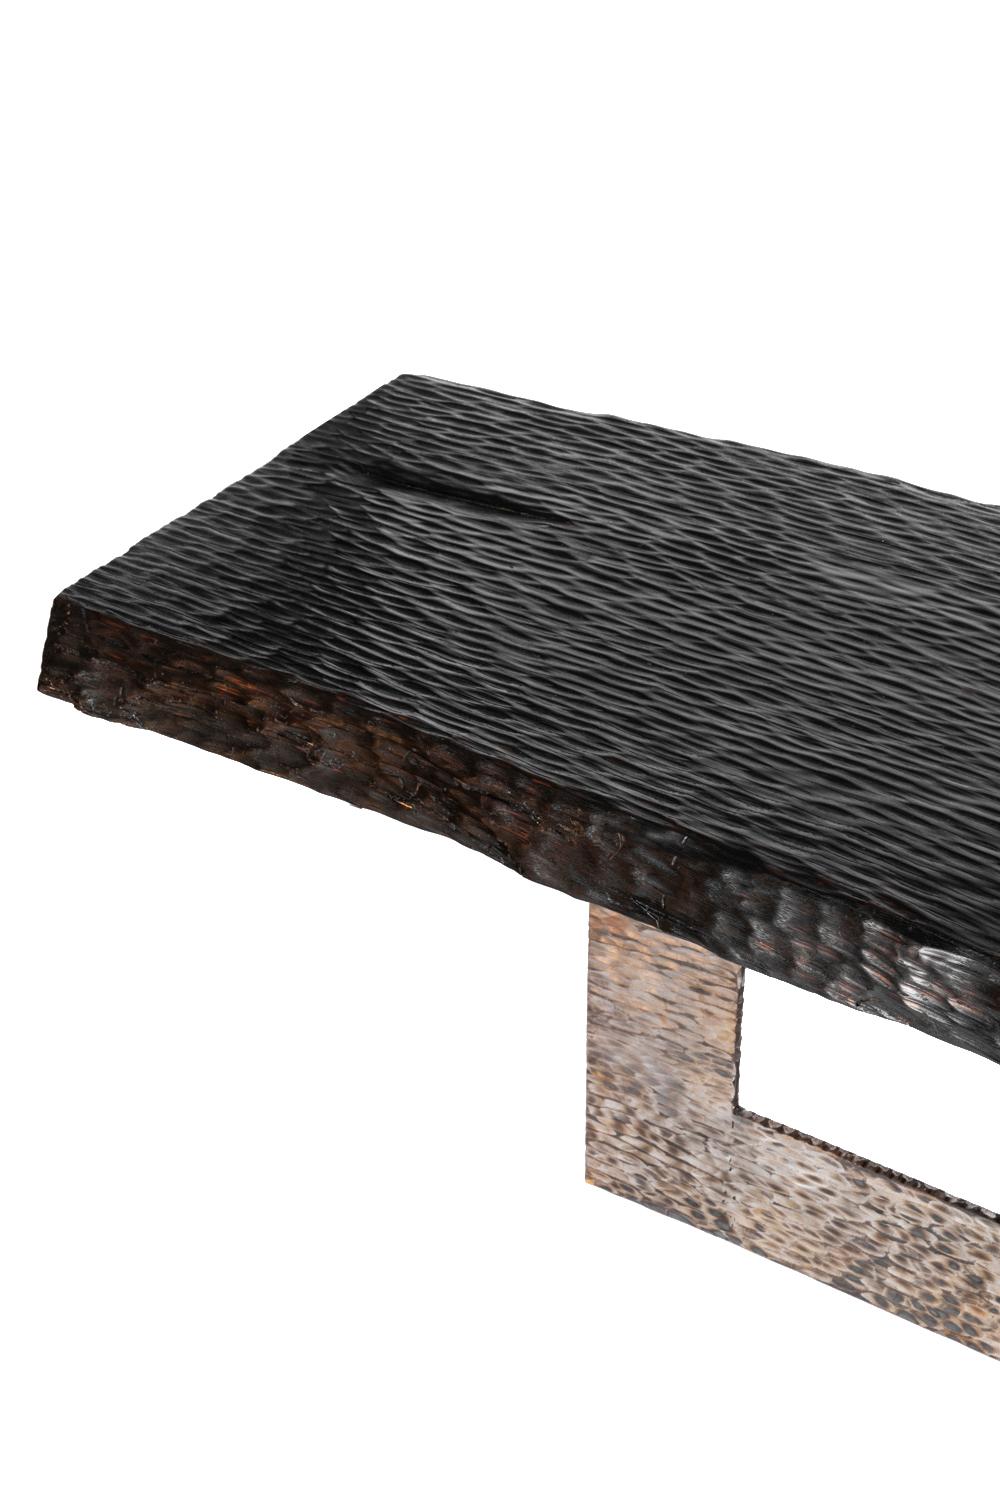 Metal Blackened Gouged Wood Coffee Table, Contemporary Work For Sale